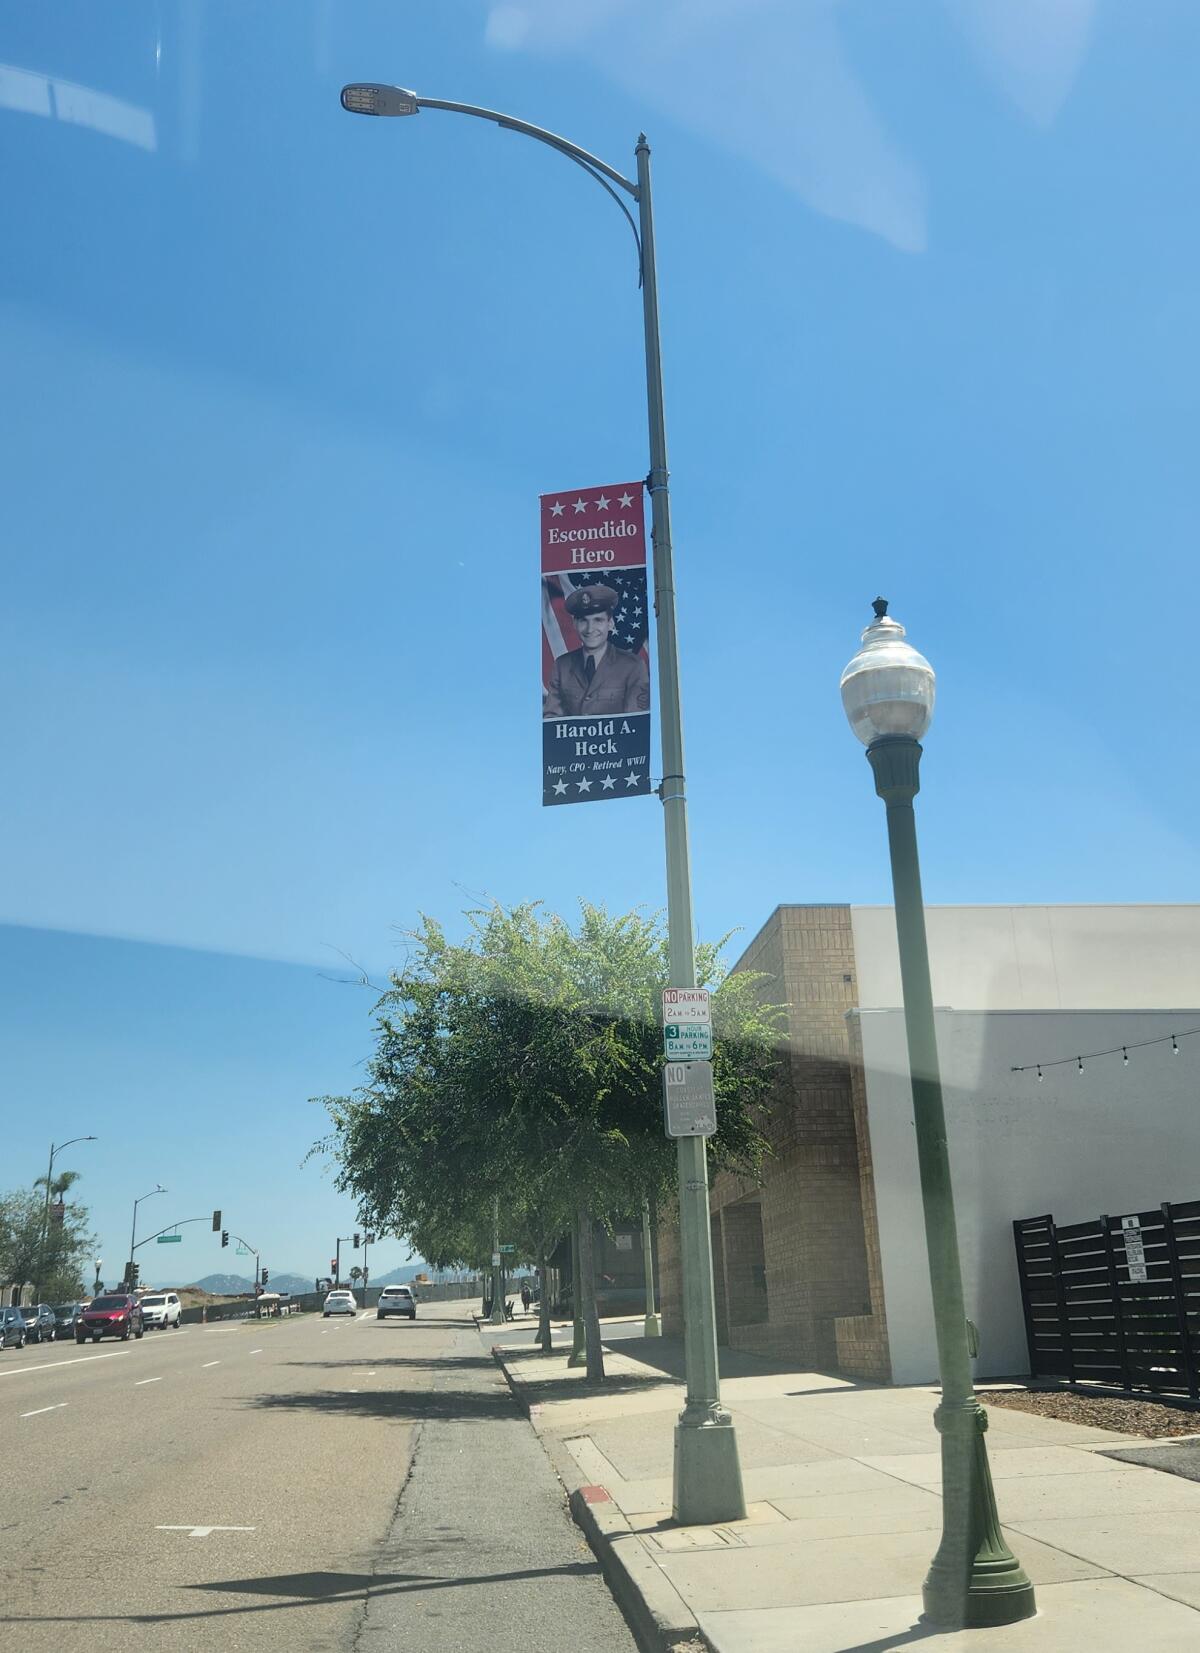 Escondido’s military banners are hung on light poles between Memorial Day and Labor Day each year.